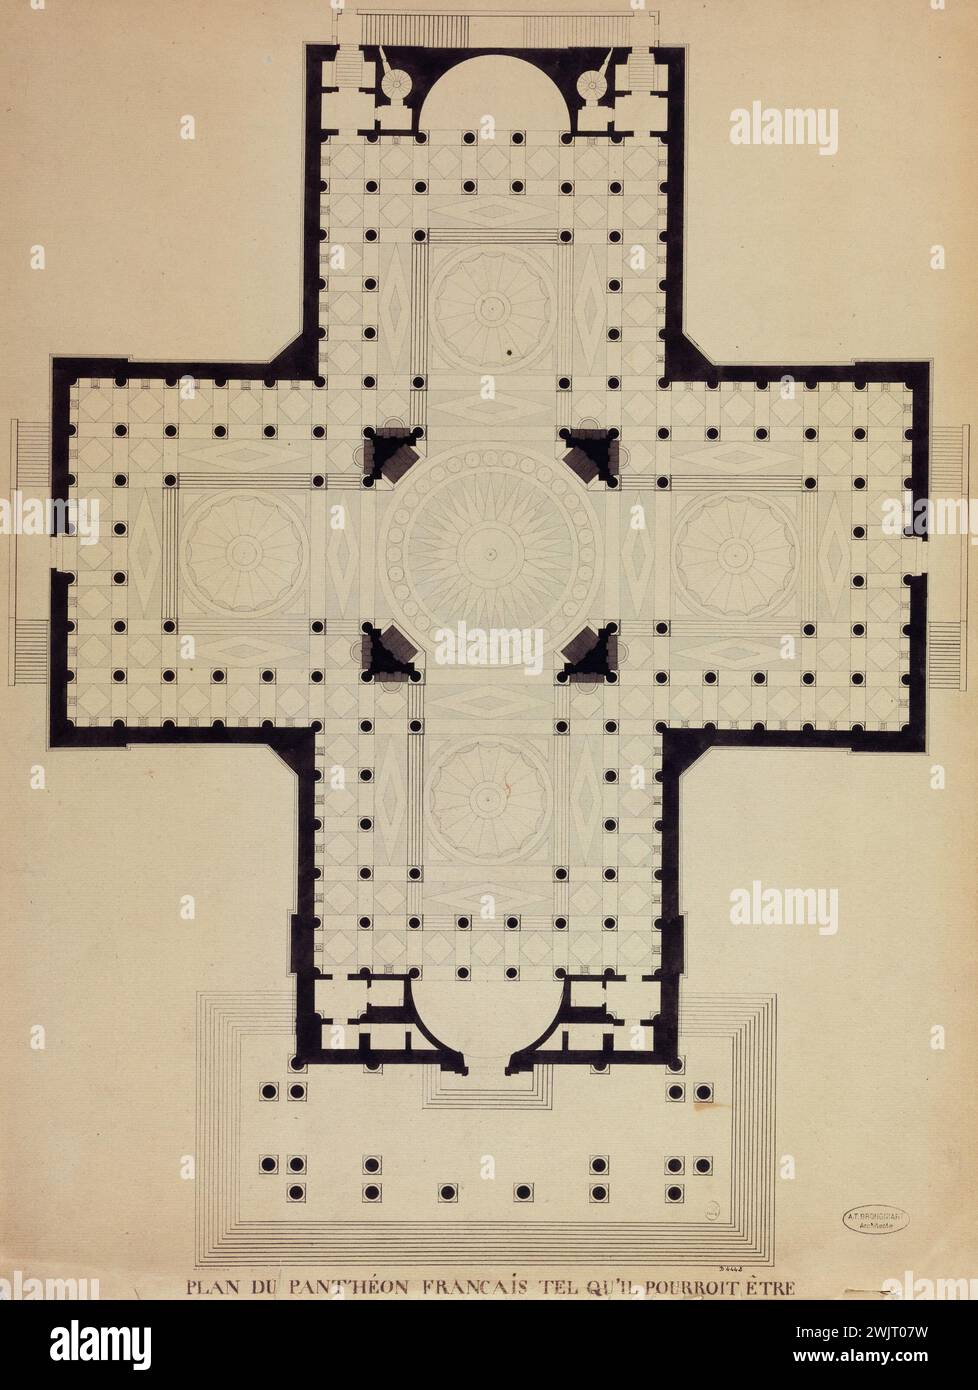 Alexandre Théodore Brongniart (1739-1813). Pantheon plan. Paris (5th arr.), 1739-1813. Chinese ink and wash on cardboard paper cream. Paris, Carnavalet museum. 77651-20 Arrondissement, drawing, ink of China, Study, Lavis, Pantheon, Plan, Project, Neoclassical Style, Veme Ve V 5th 5th 5th 5th 5th 5th 5th 5th 5th 5th 5th 5th 5th 5th 5th 5th 5th 5th 5th 5th 5th 5th 5th Stock Photo